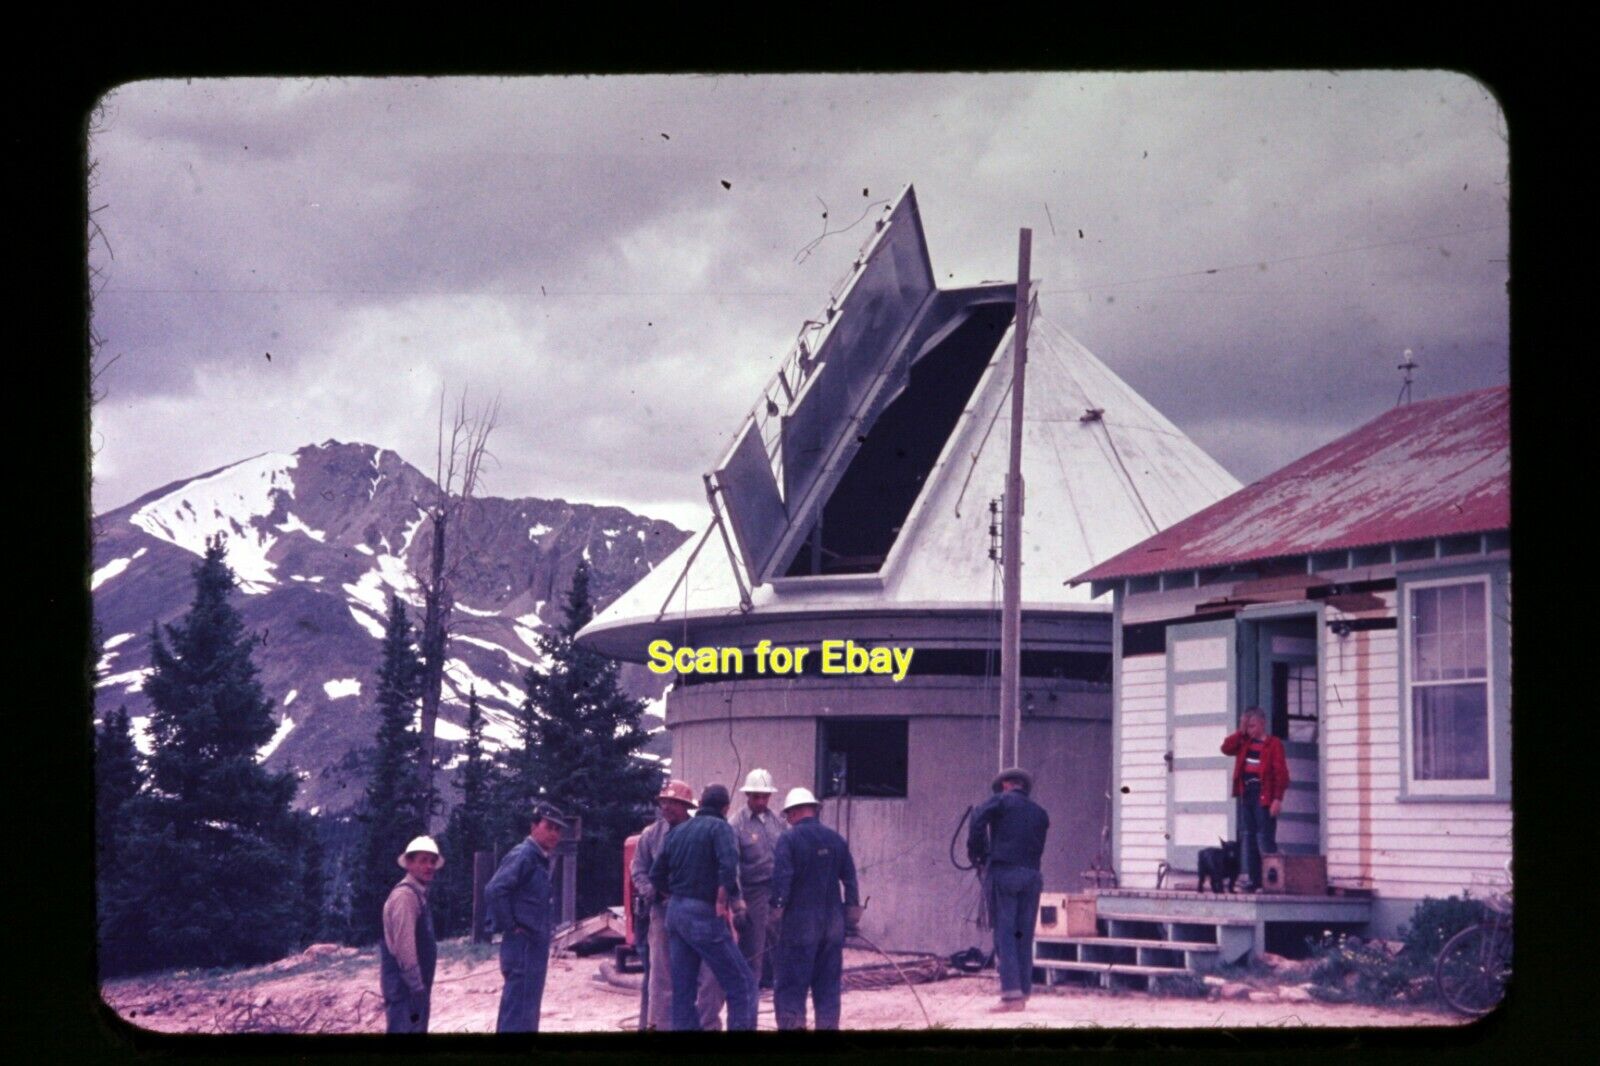 Solar Observatory in New Mexico in 1940's, Original Slide aa 3-12a